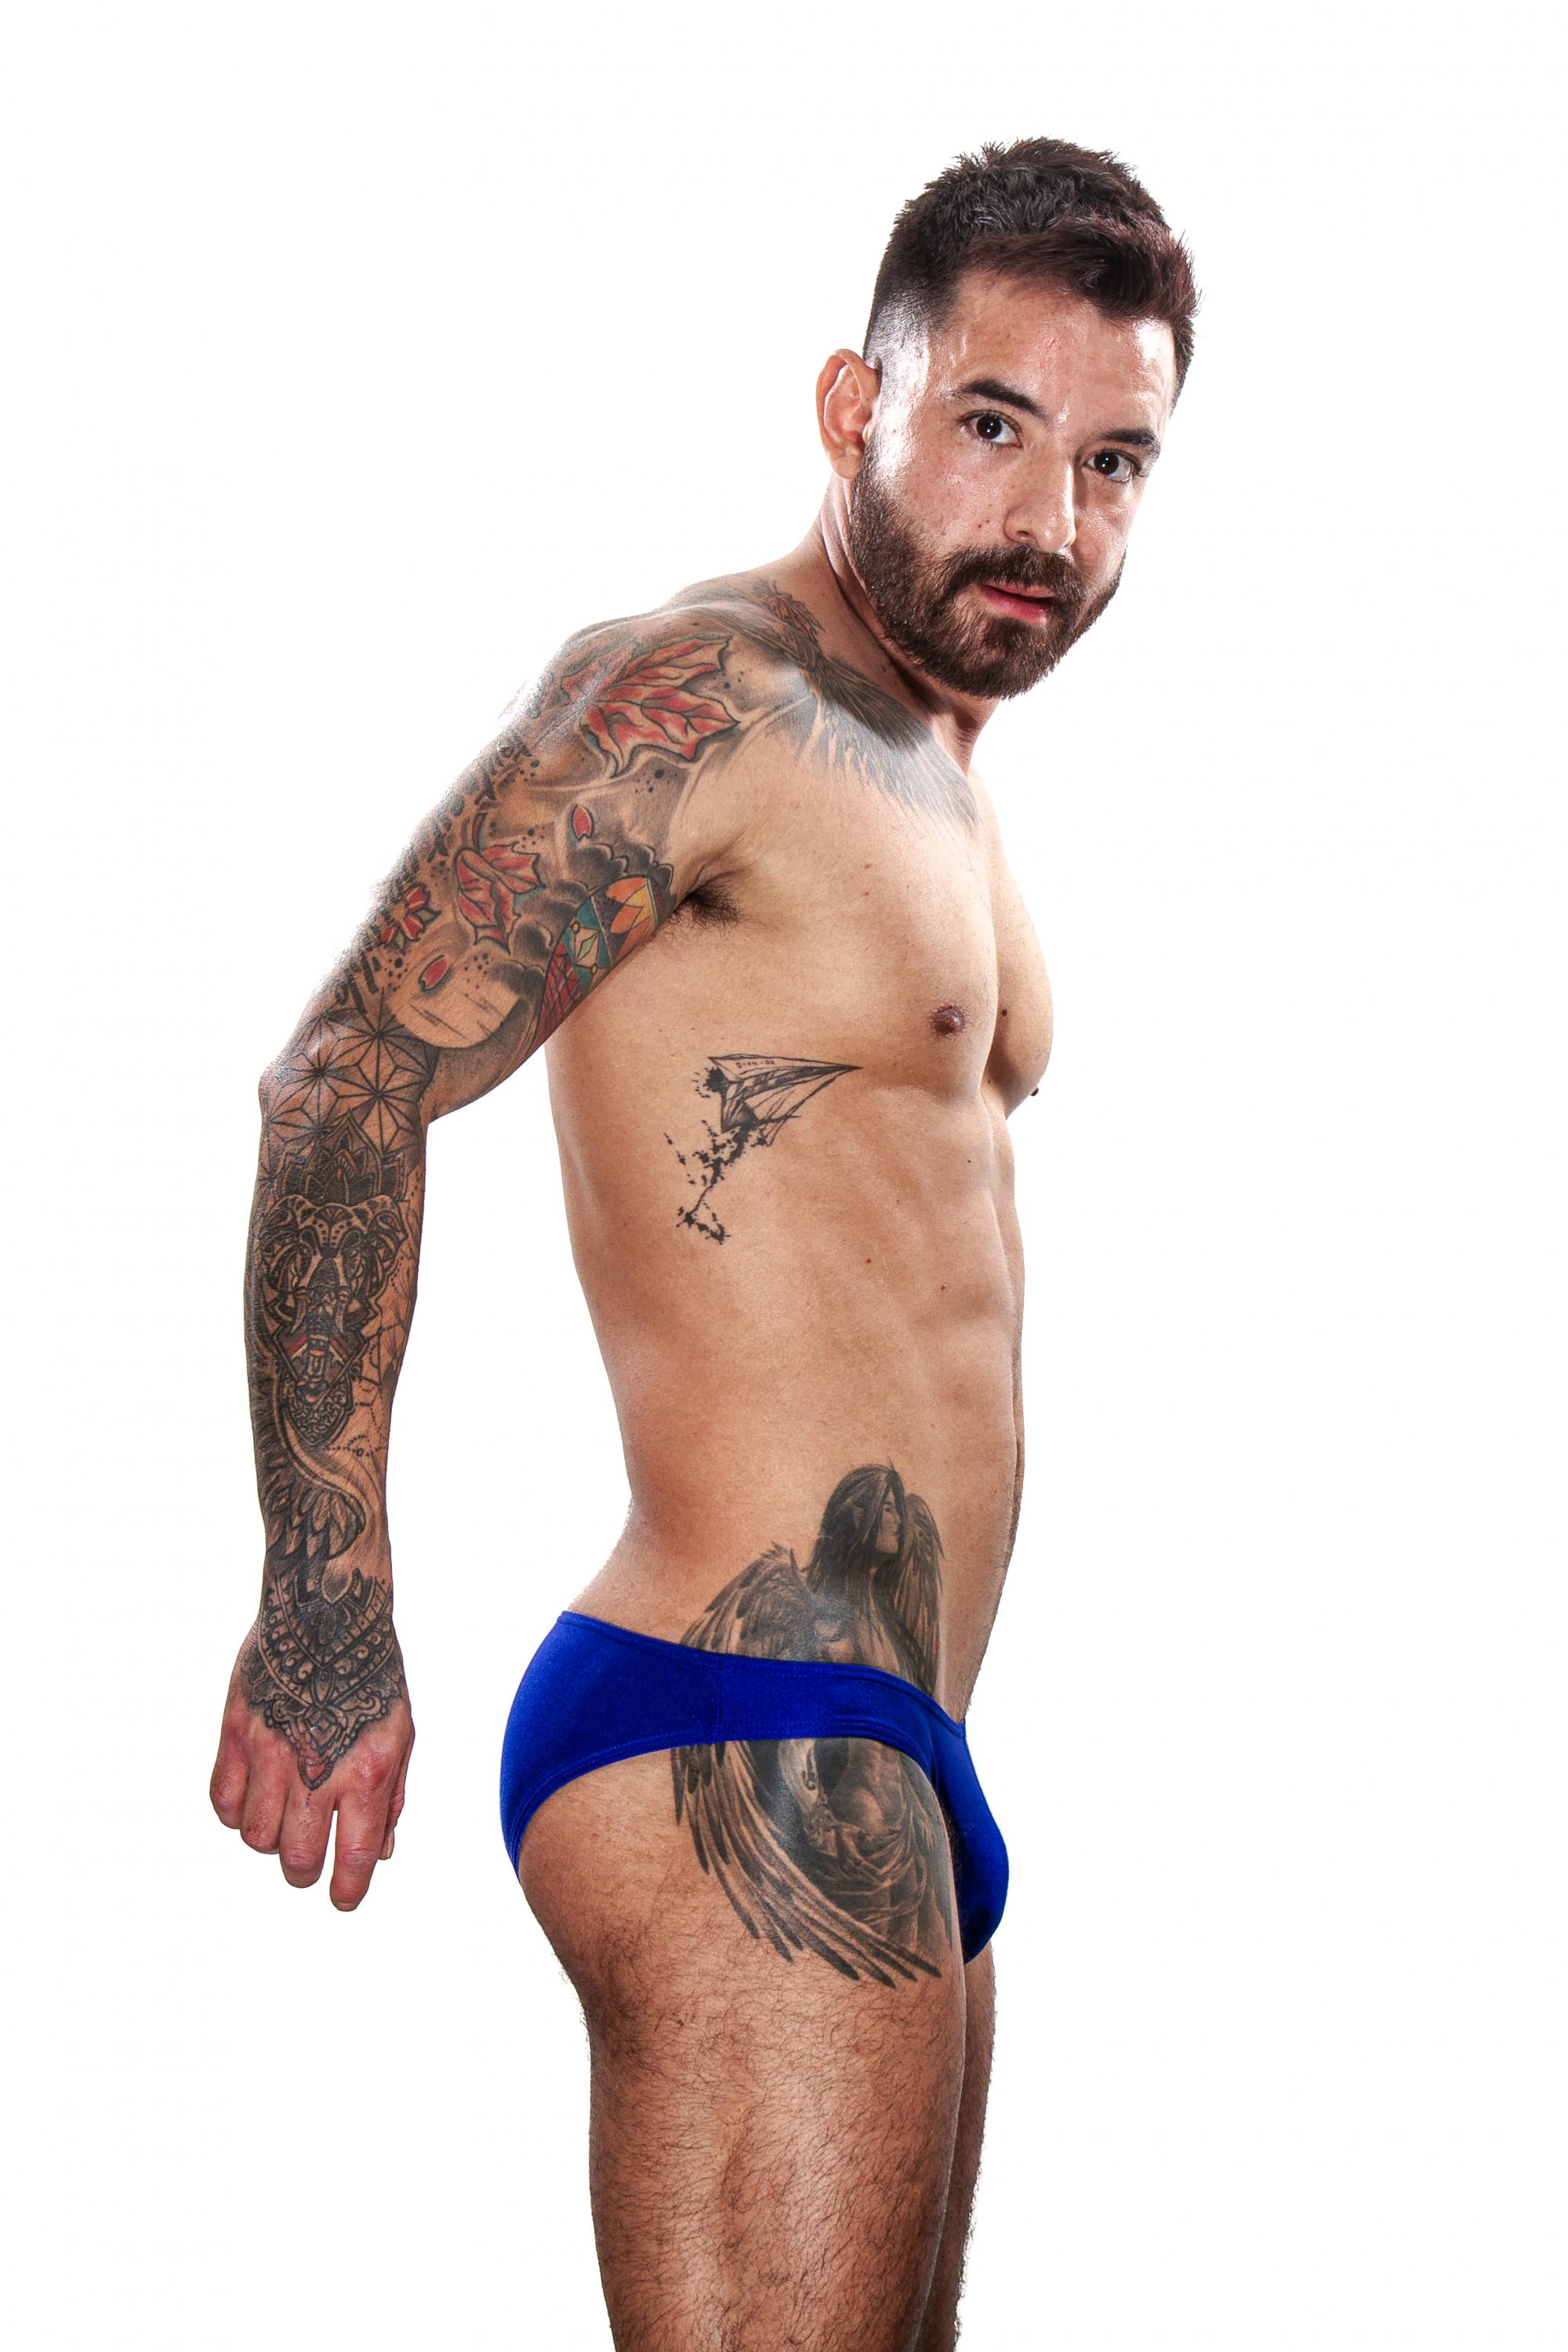 Show off your bold side and shop our selection of mens bikini underwear. Perfect for men who are not afraid to get racy! Browse our sizzling styles and patterns